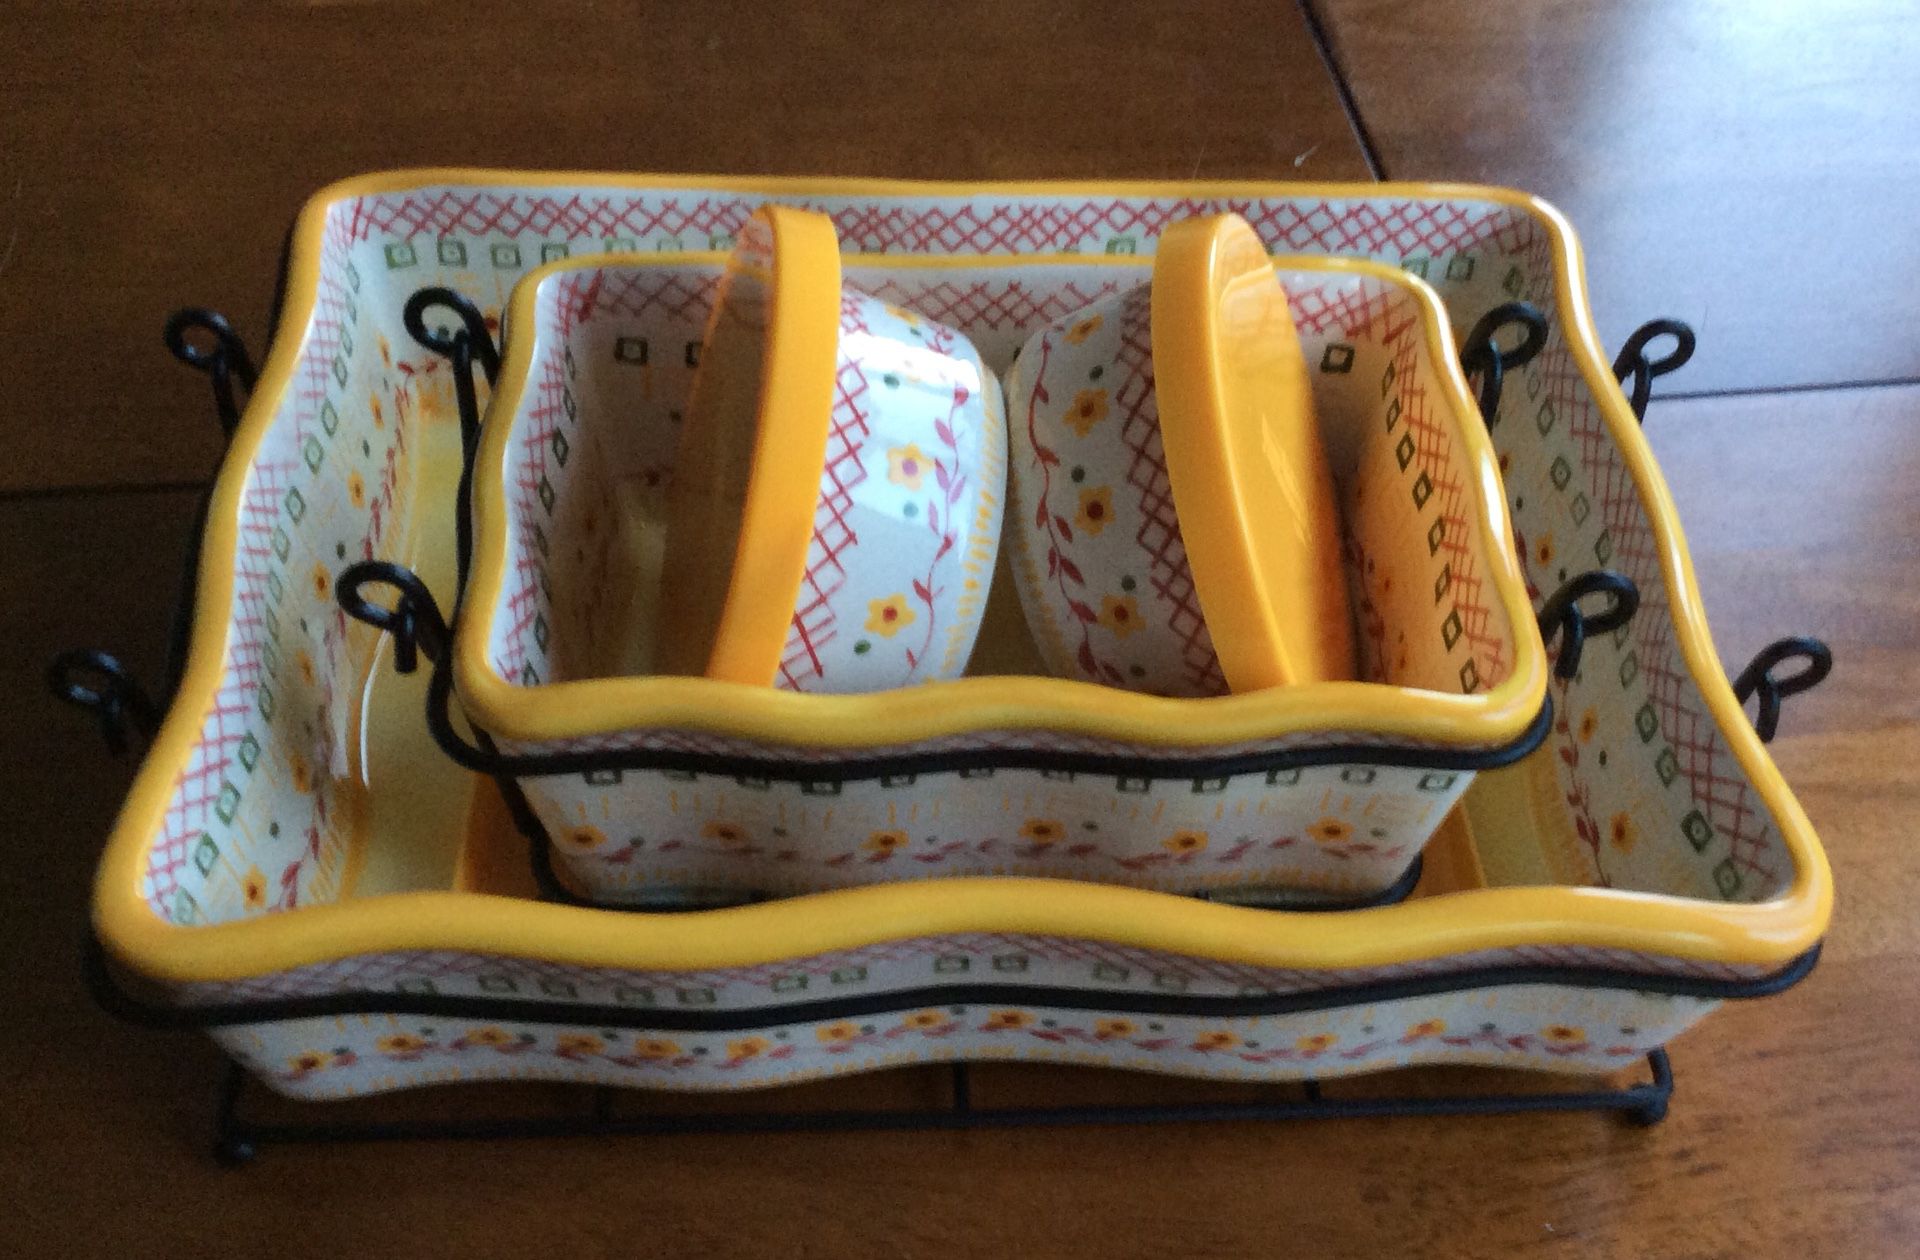 Temptation Yellow Bakeware by Tara 8 piece set with Trivets and Racks